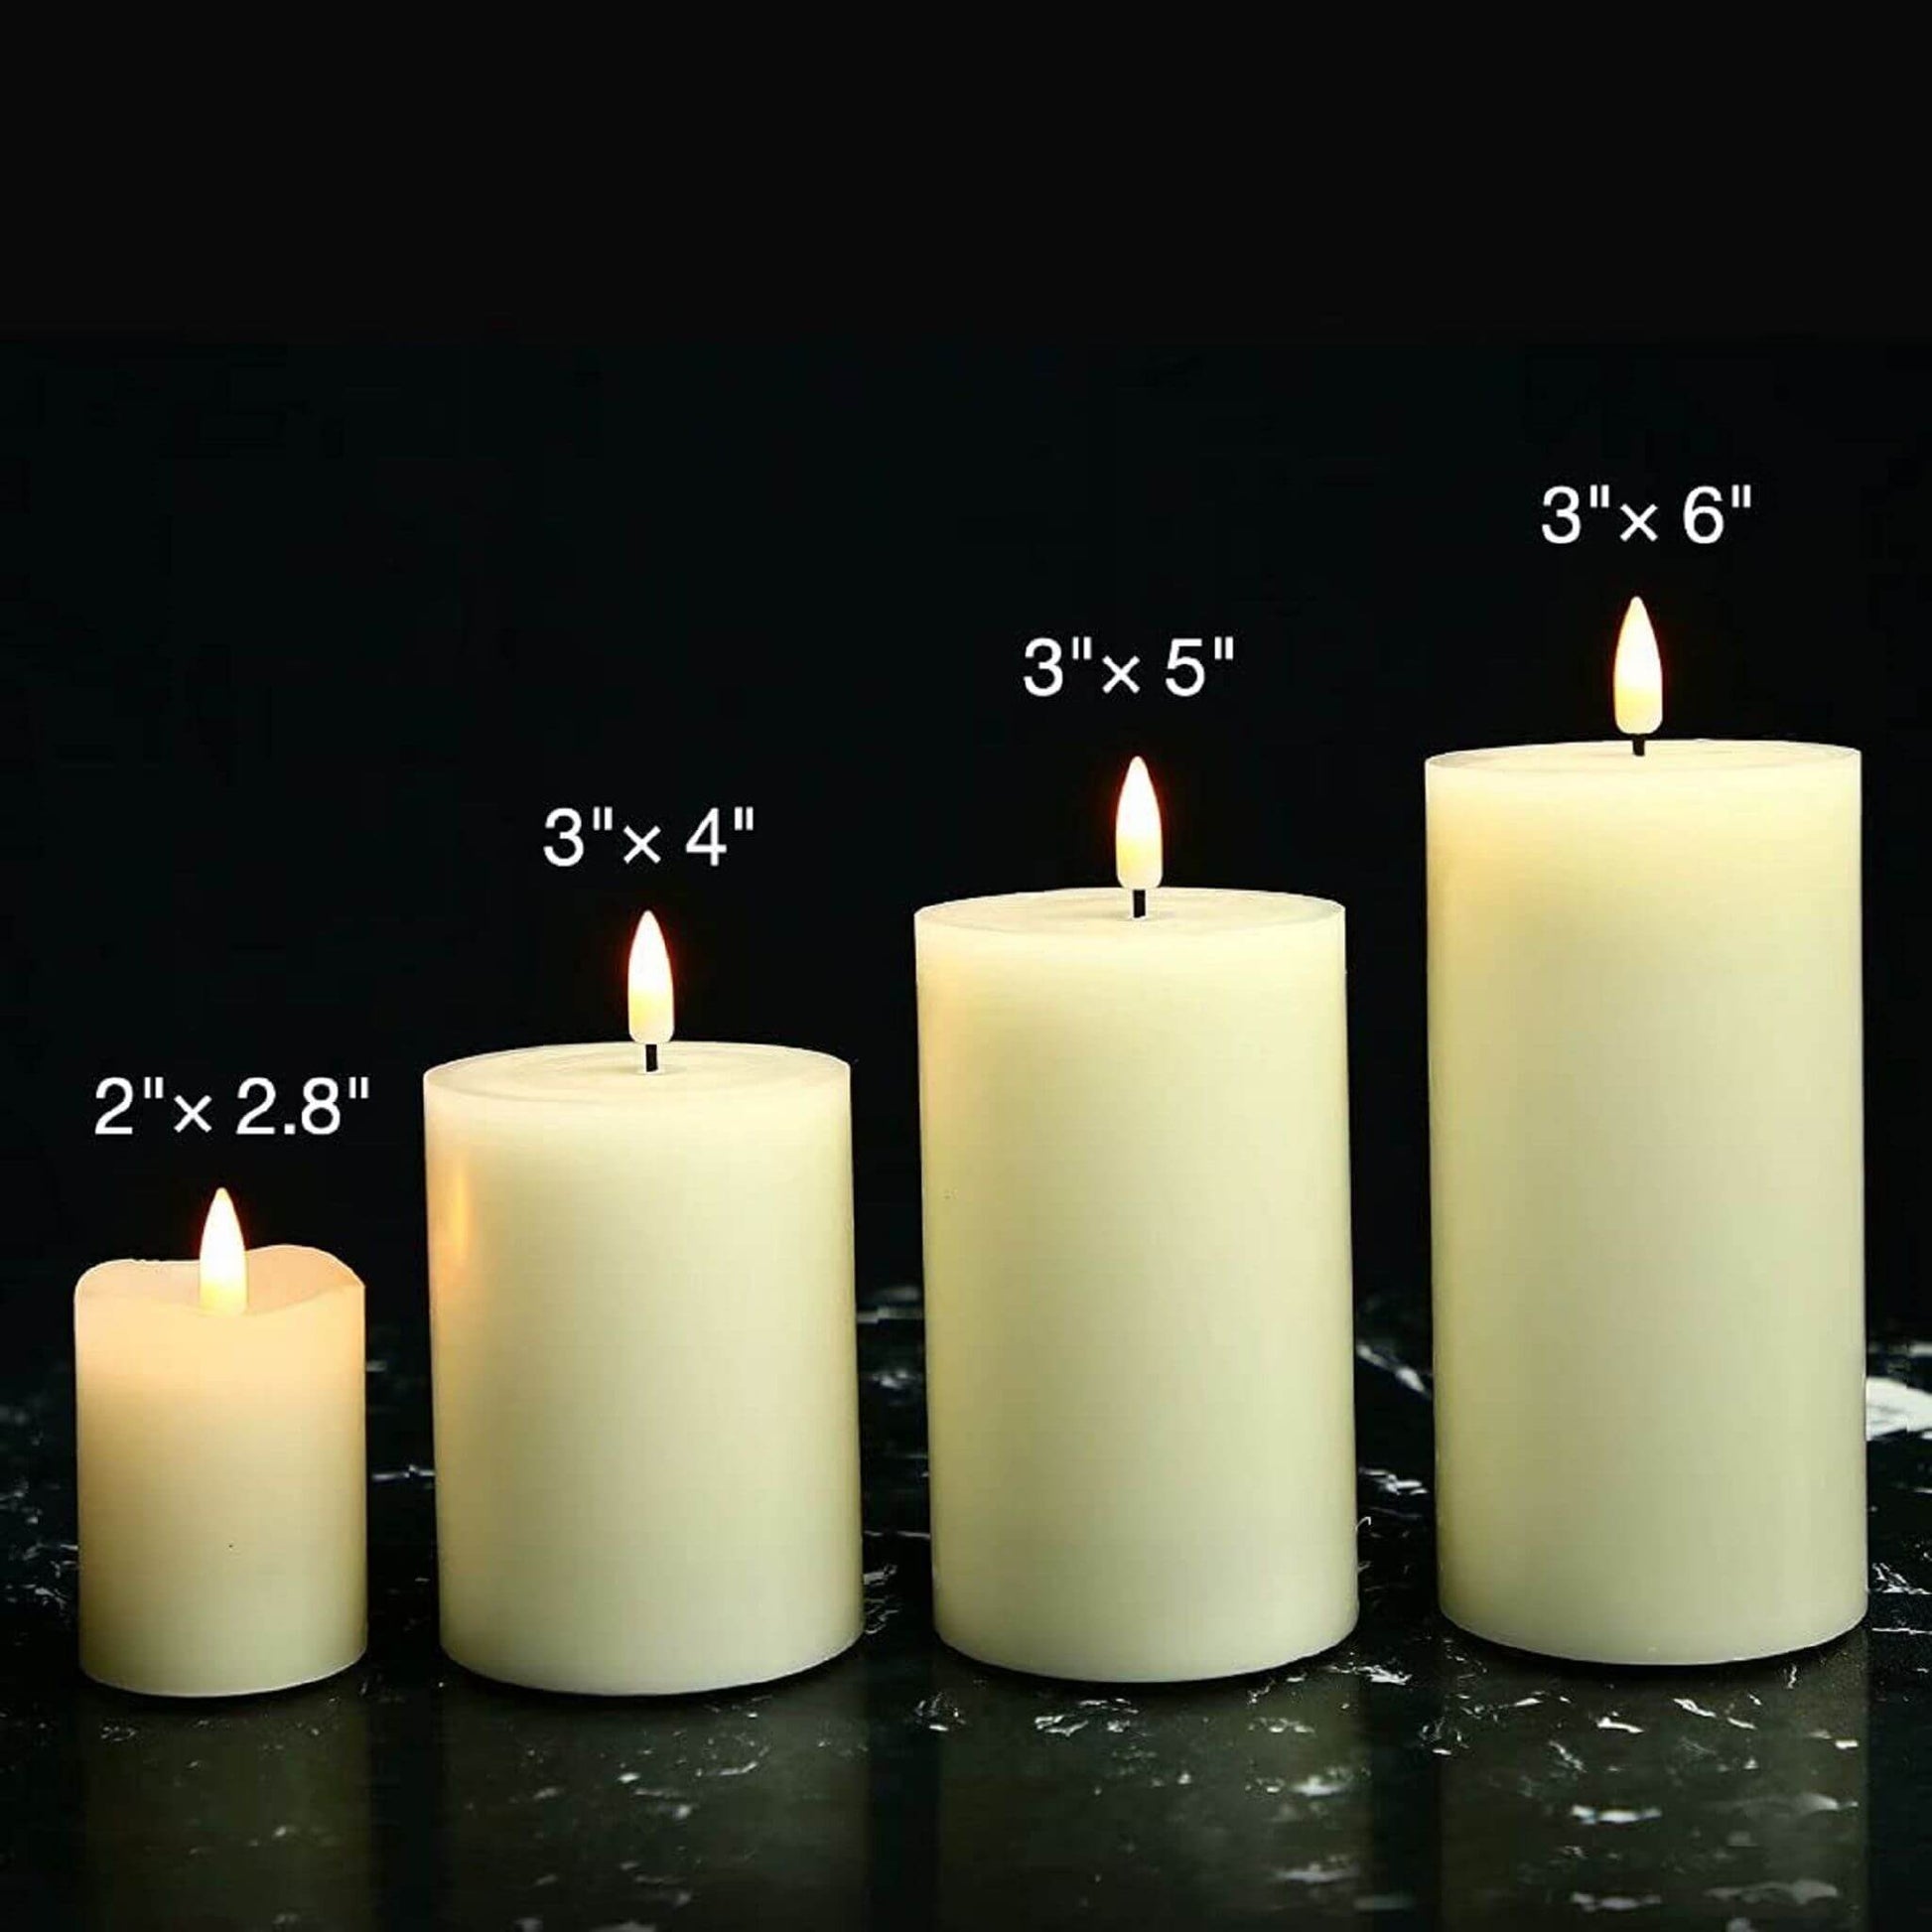 Four eywamage flameless votive pillar candles are placed on the marble table, one of which is 2 inches in diameter and 2.8 inches in height. The other three are 3 inches in diameter and 4, 5, and 6 inches in height